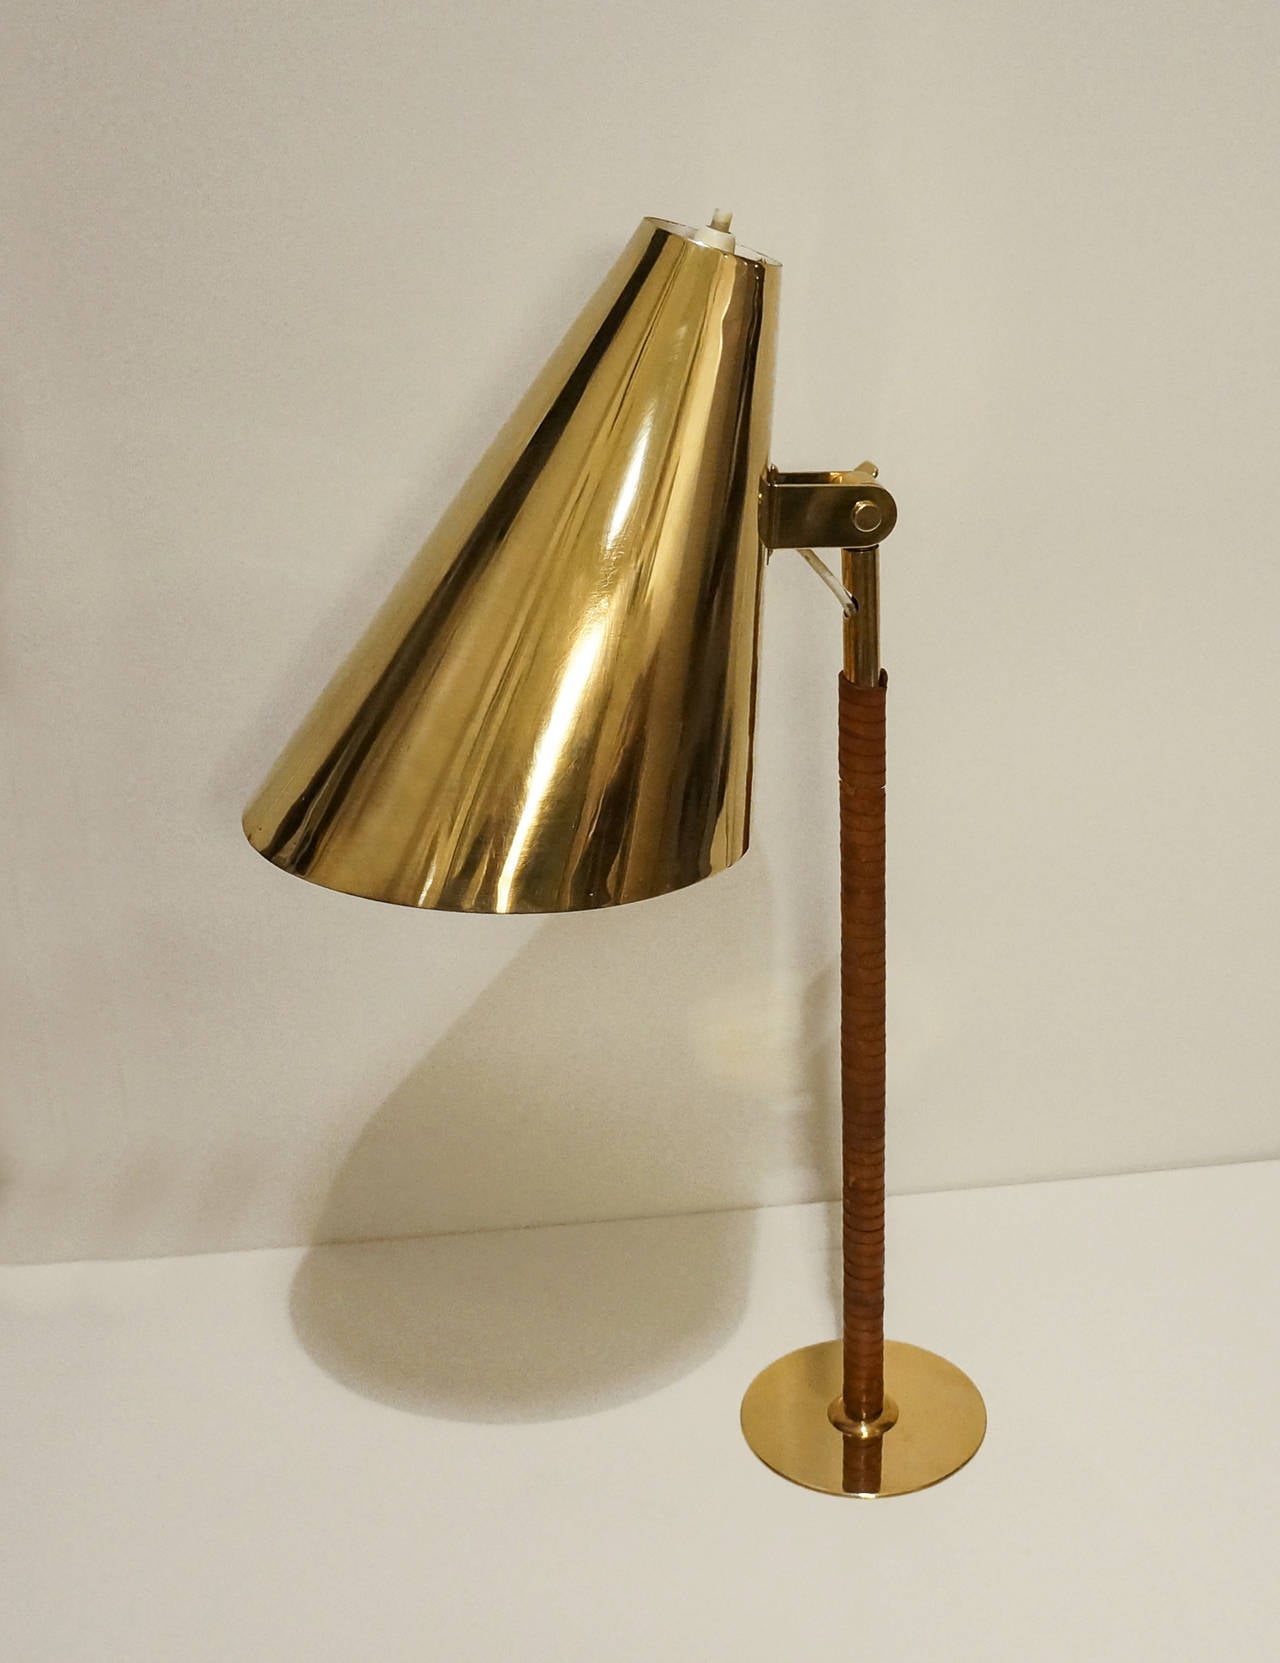 Finnish Paavo Tynell Rare Table Lamp, Early 1950s, Taito Oy